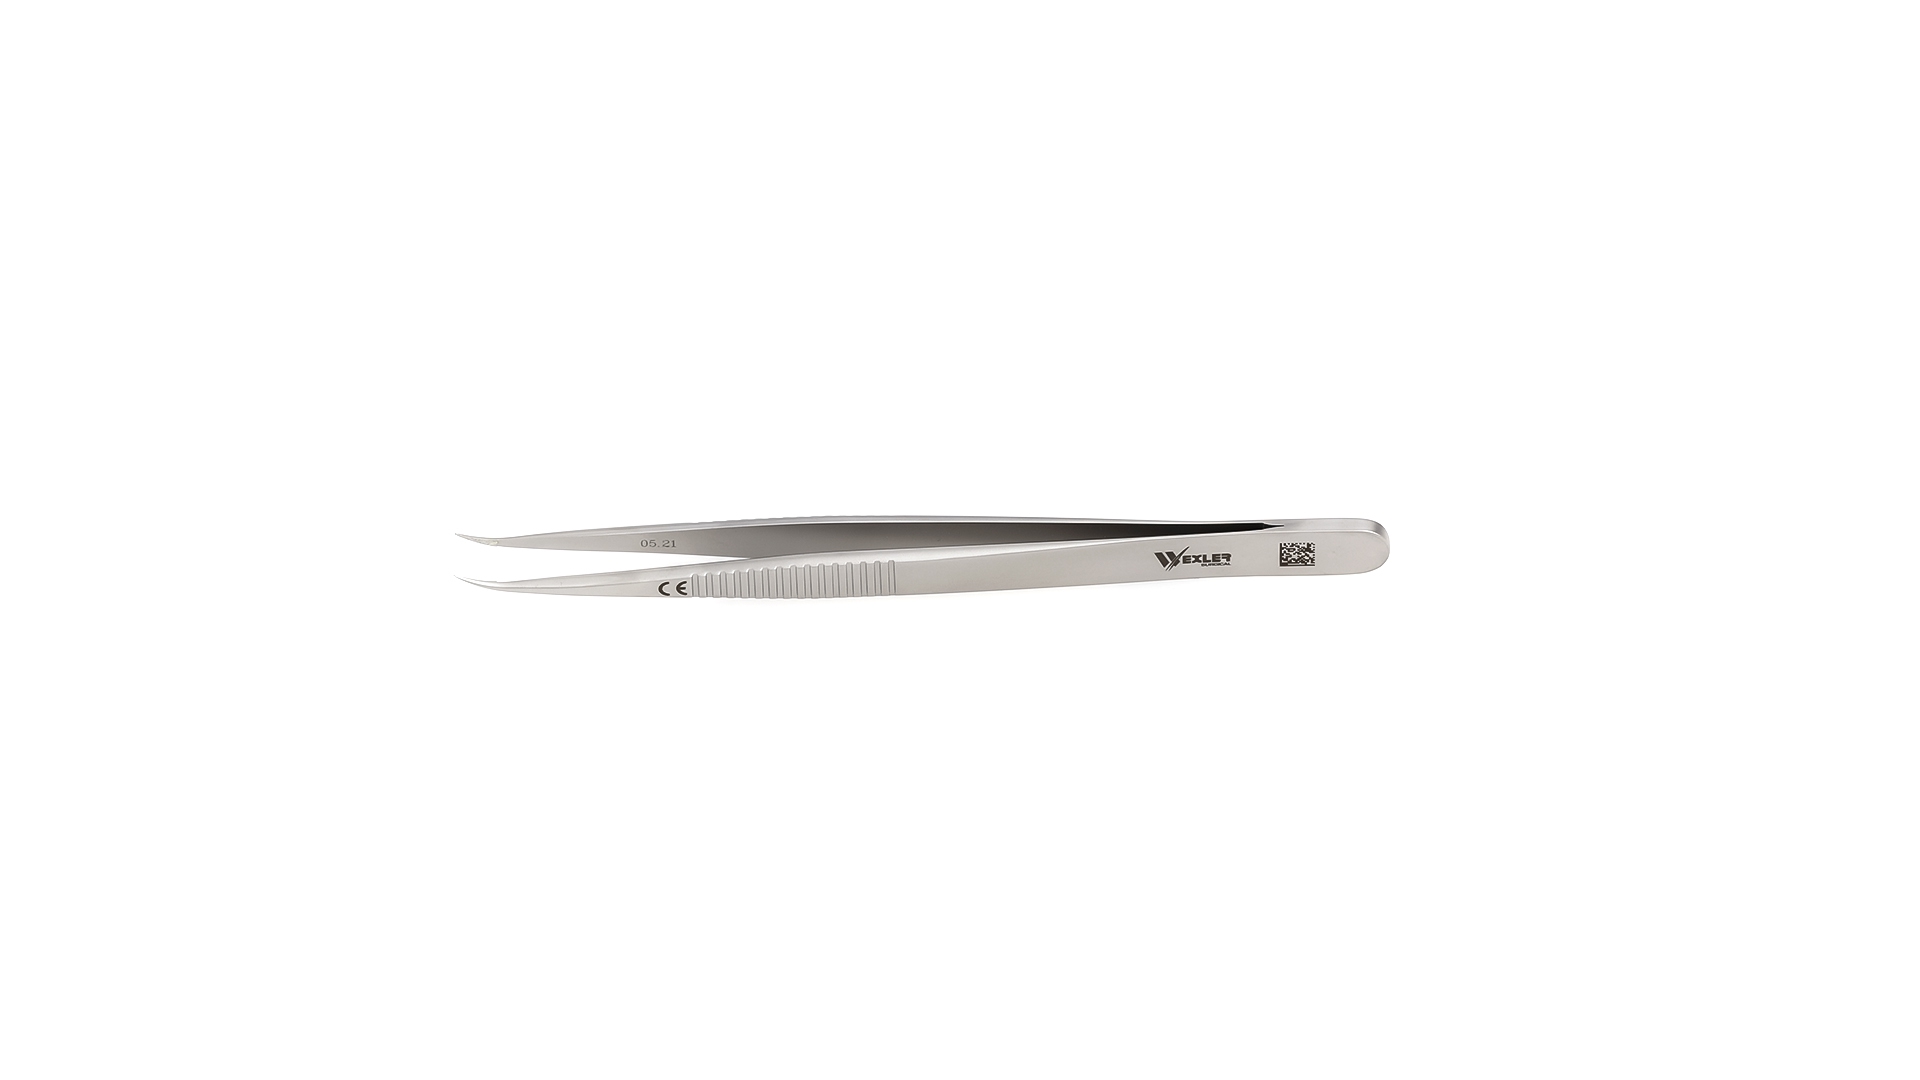 Jeweler Style Forceps #3- Curved 0.3mm tips w/TC coated tying platform